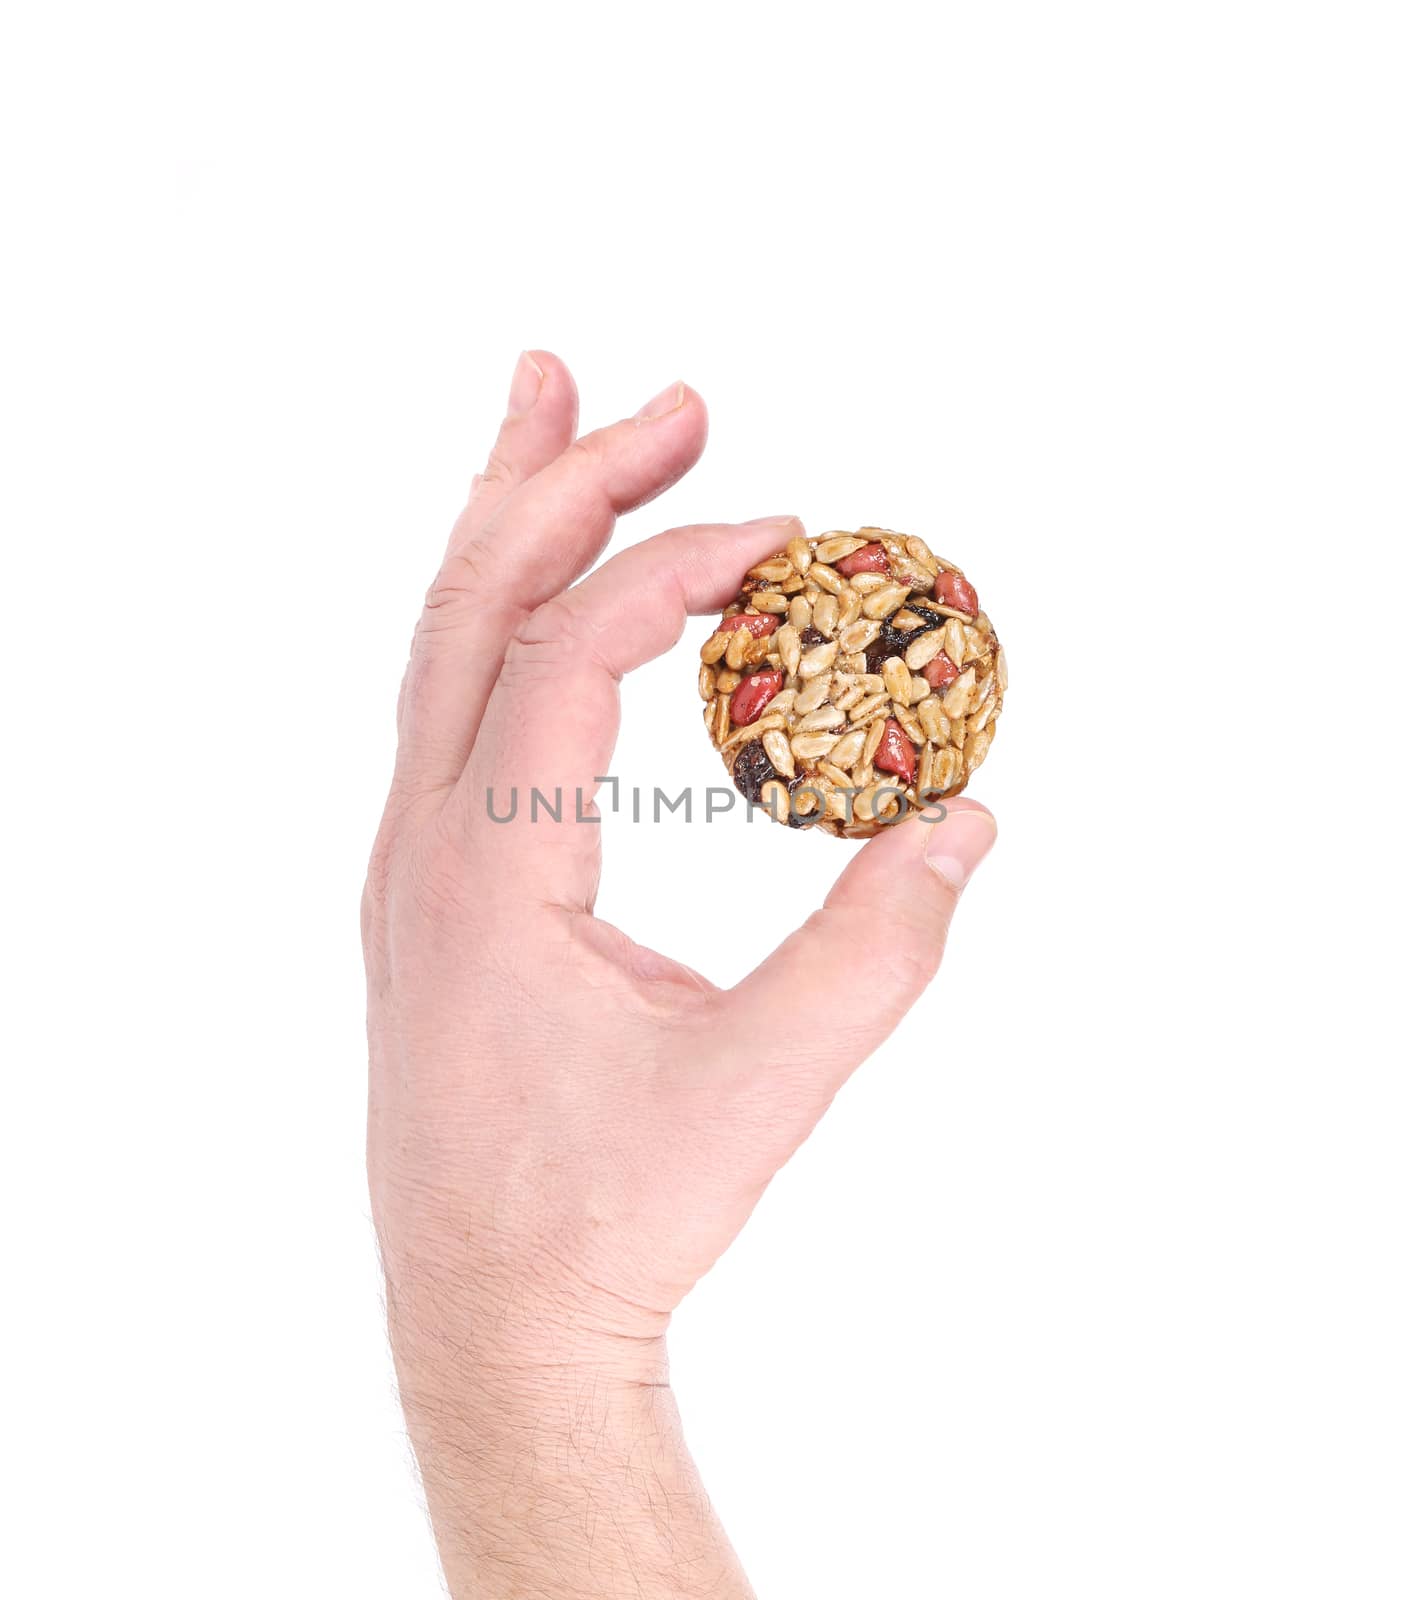 Hand holds candied peanuts sunflower seeds. Isolated on a white background.